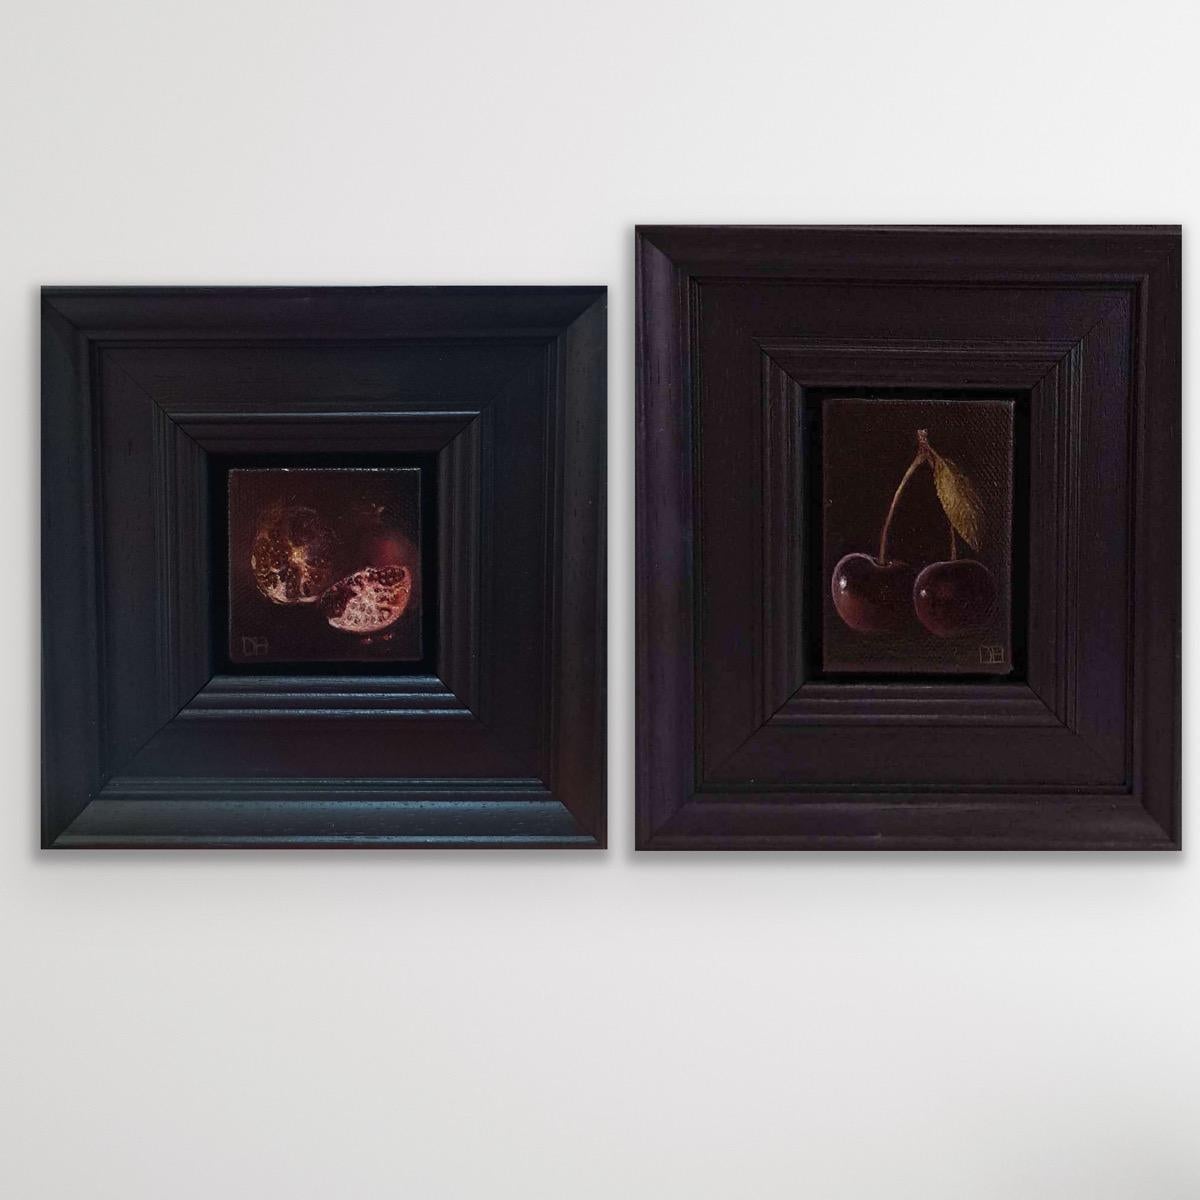 Dani Humberstone Landscape Painting - Diptych of Pocket Chiaroscuro Pomegranate Tableau and Pocket Dark Cherries